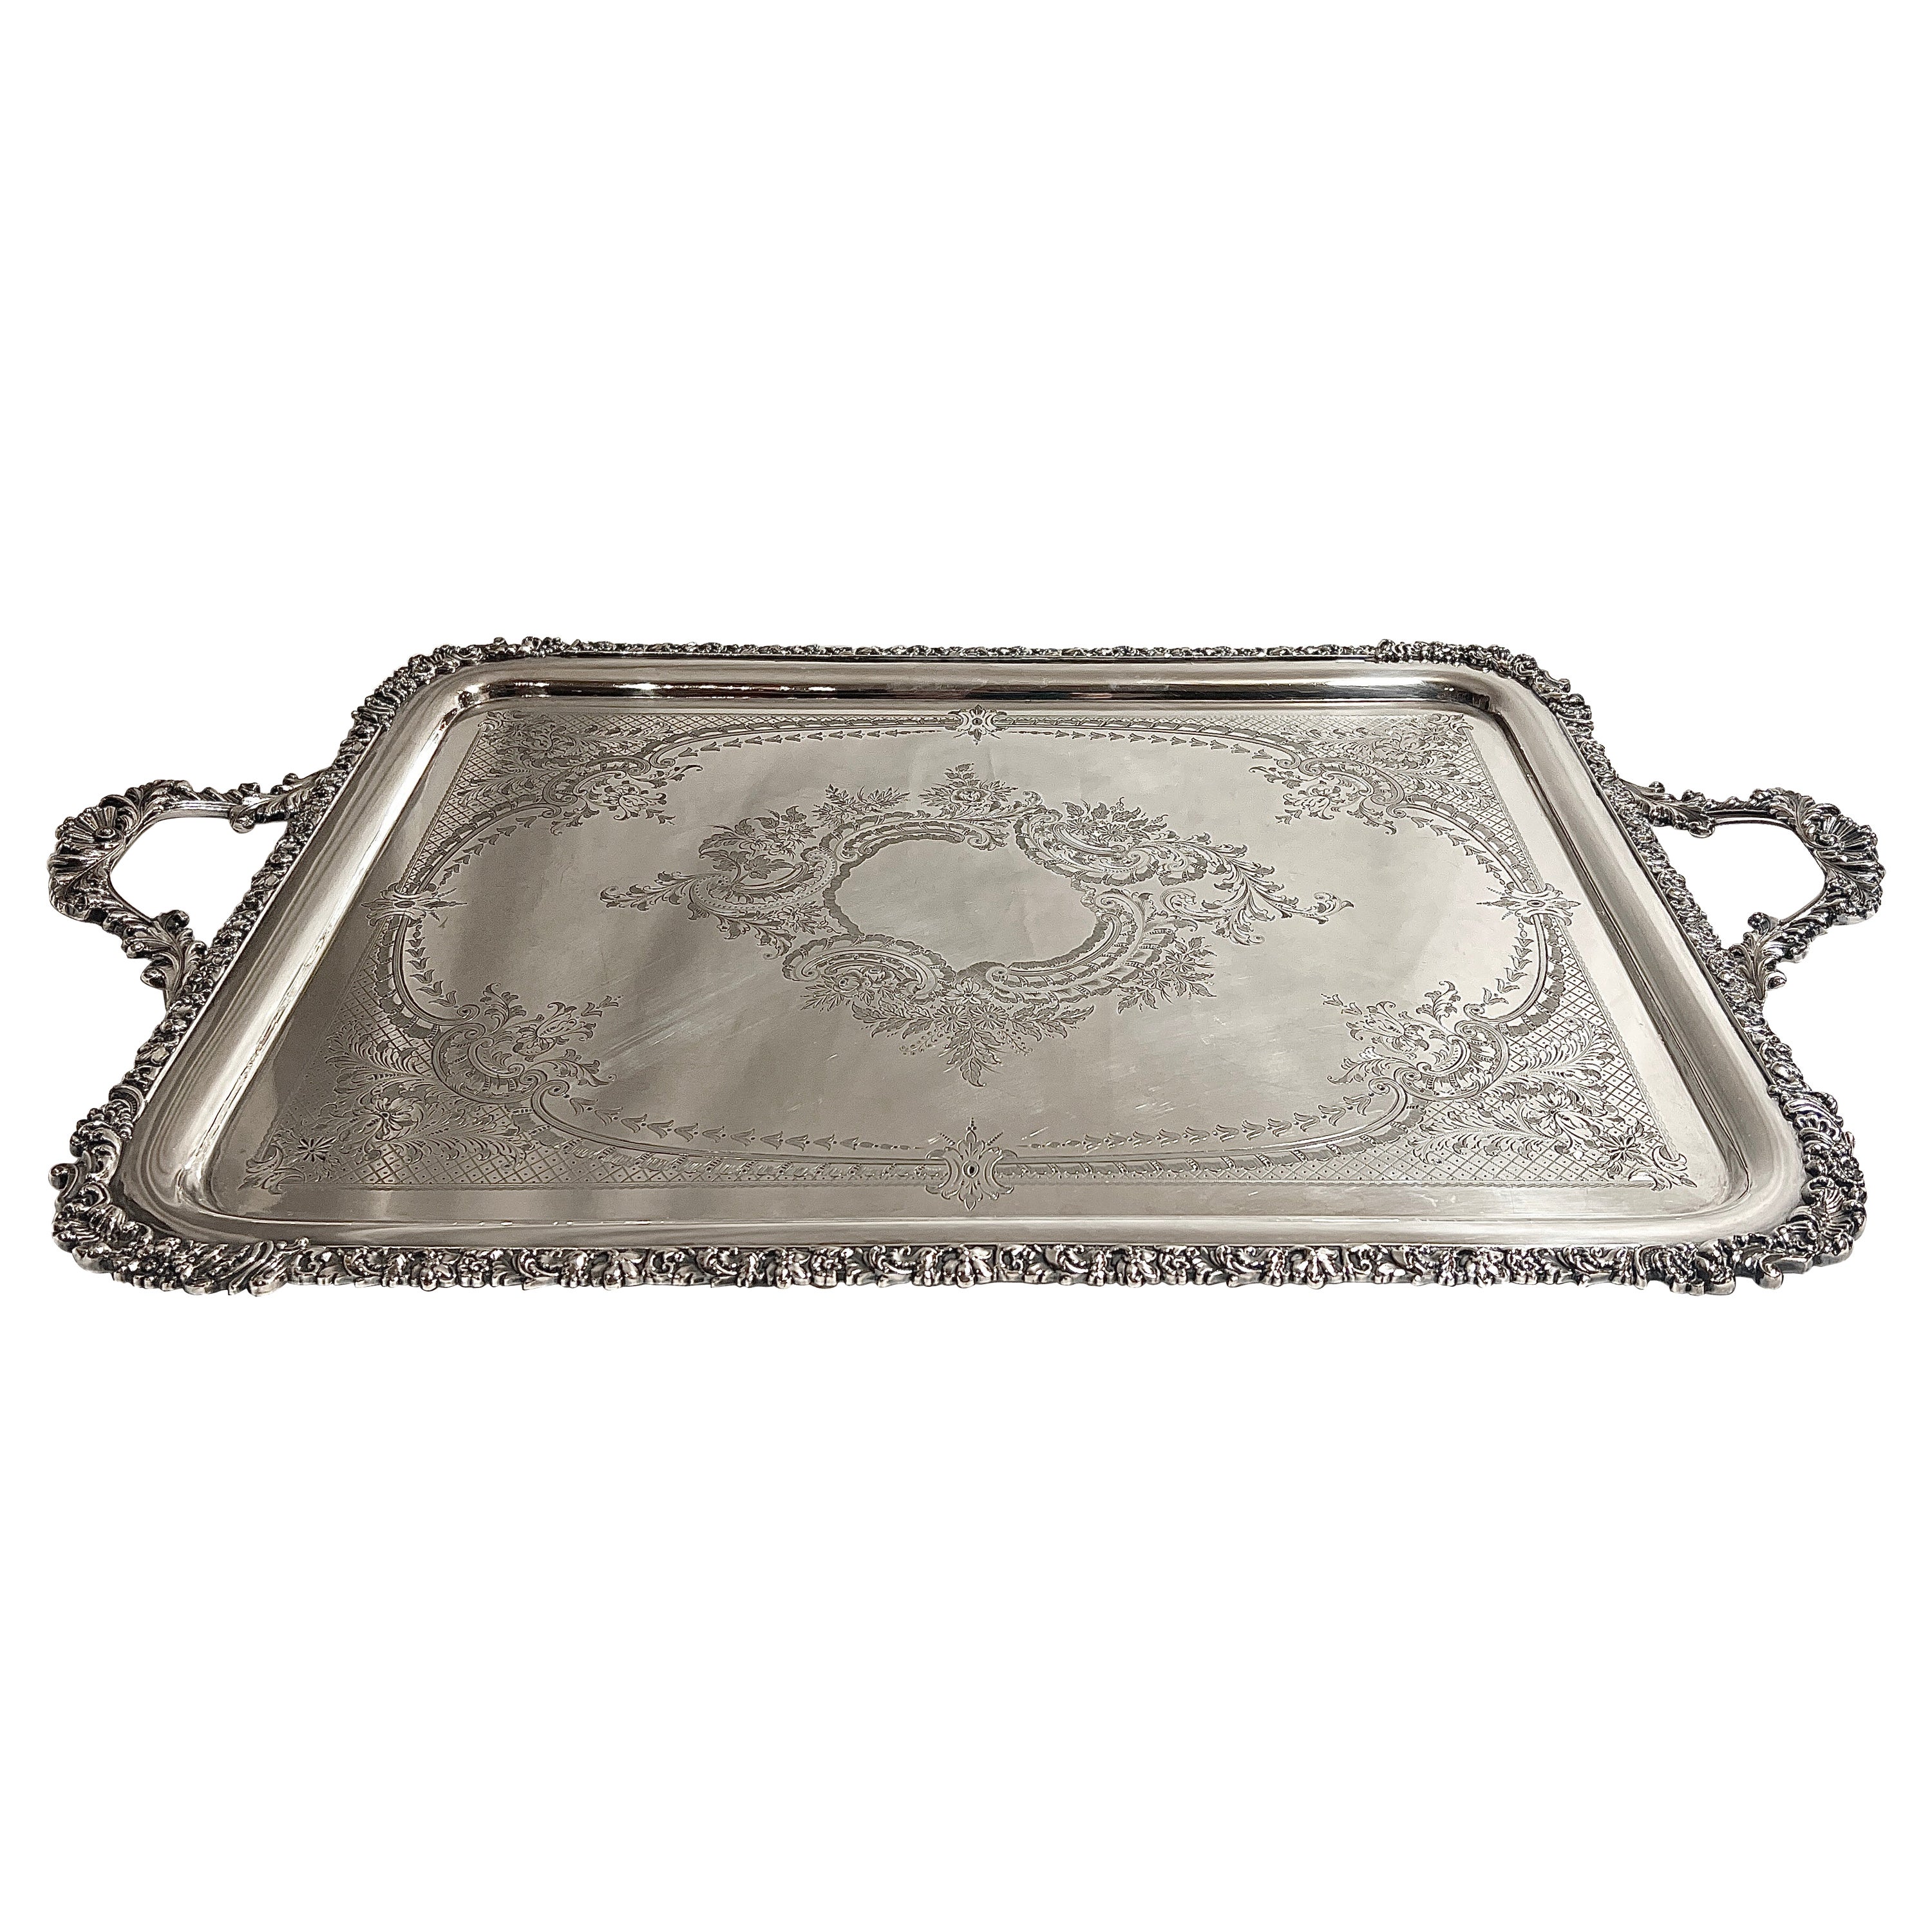 Antique Silver Plated Service Tray with Engraving and Rolled Border, Circa 1890.